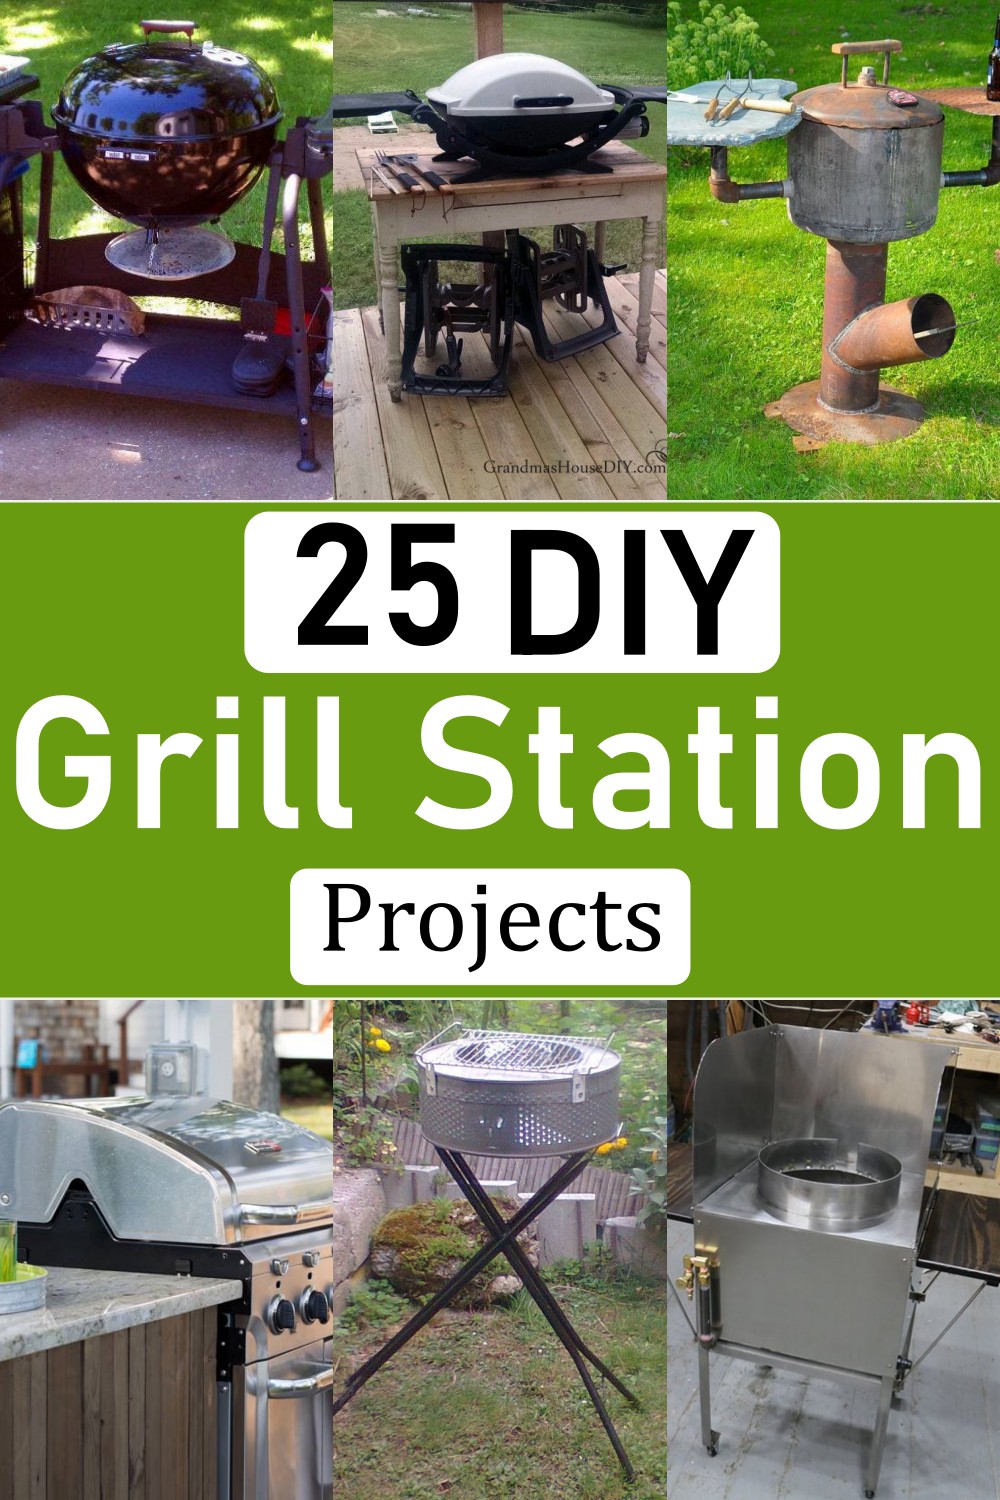 Grill Station Projects